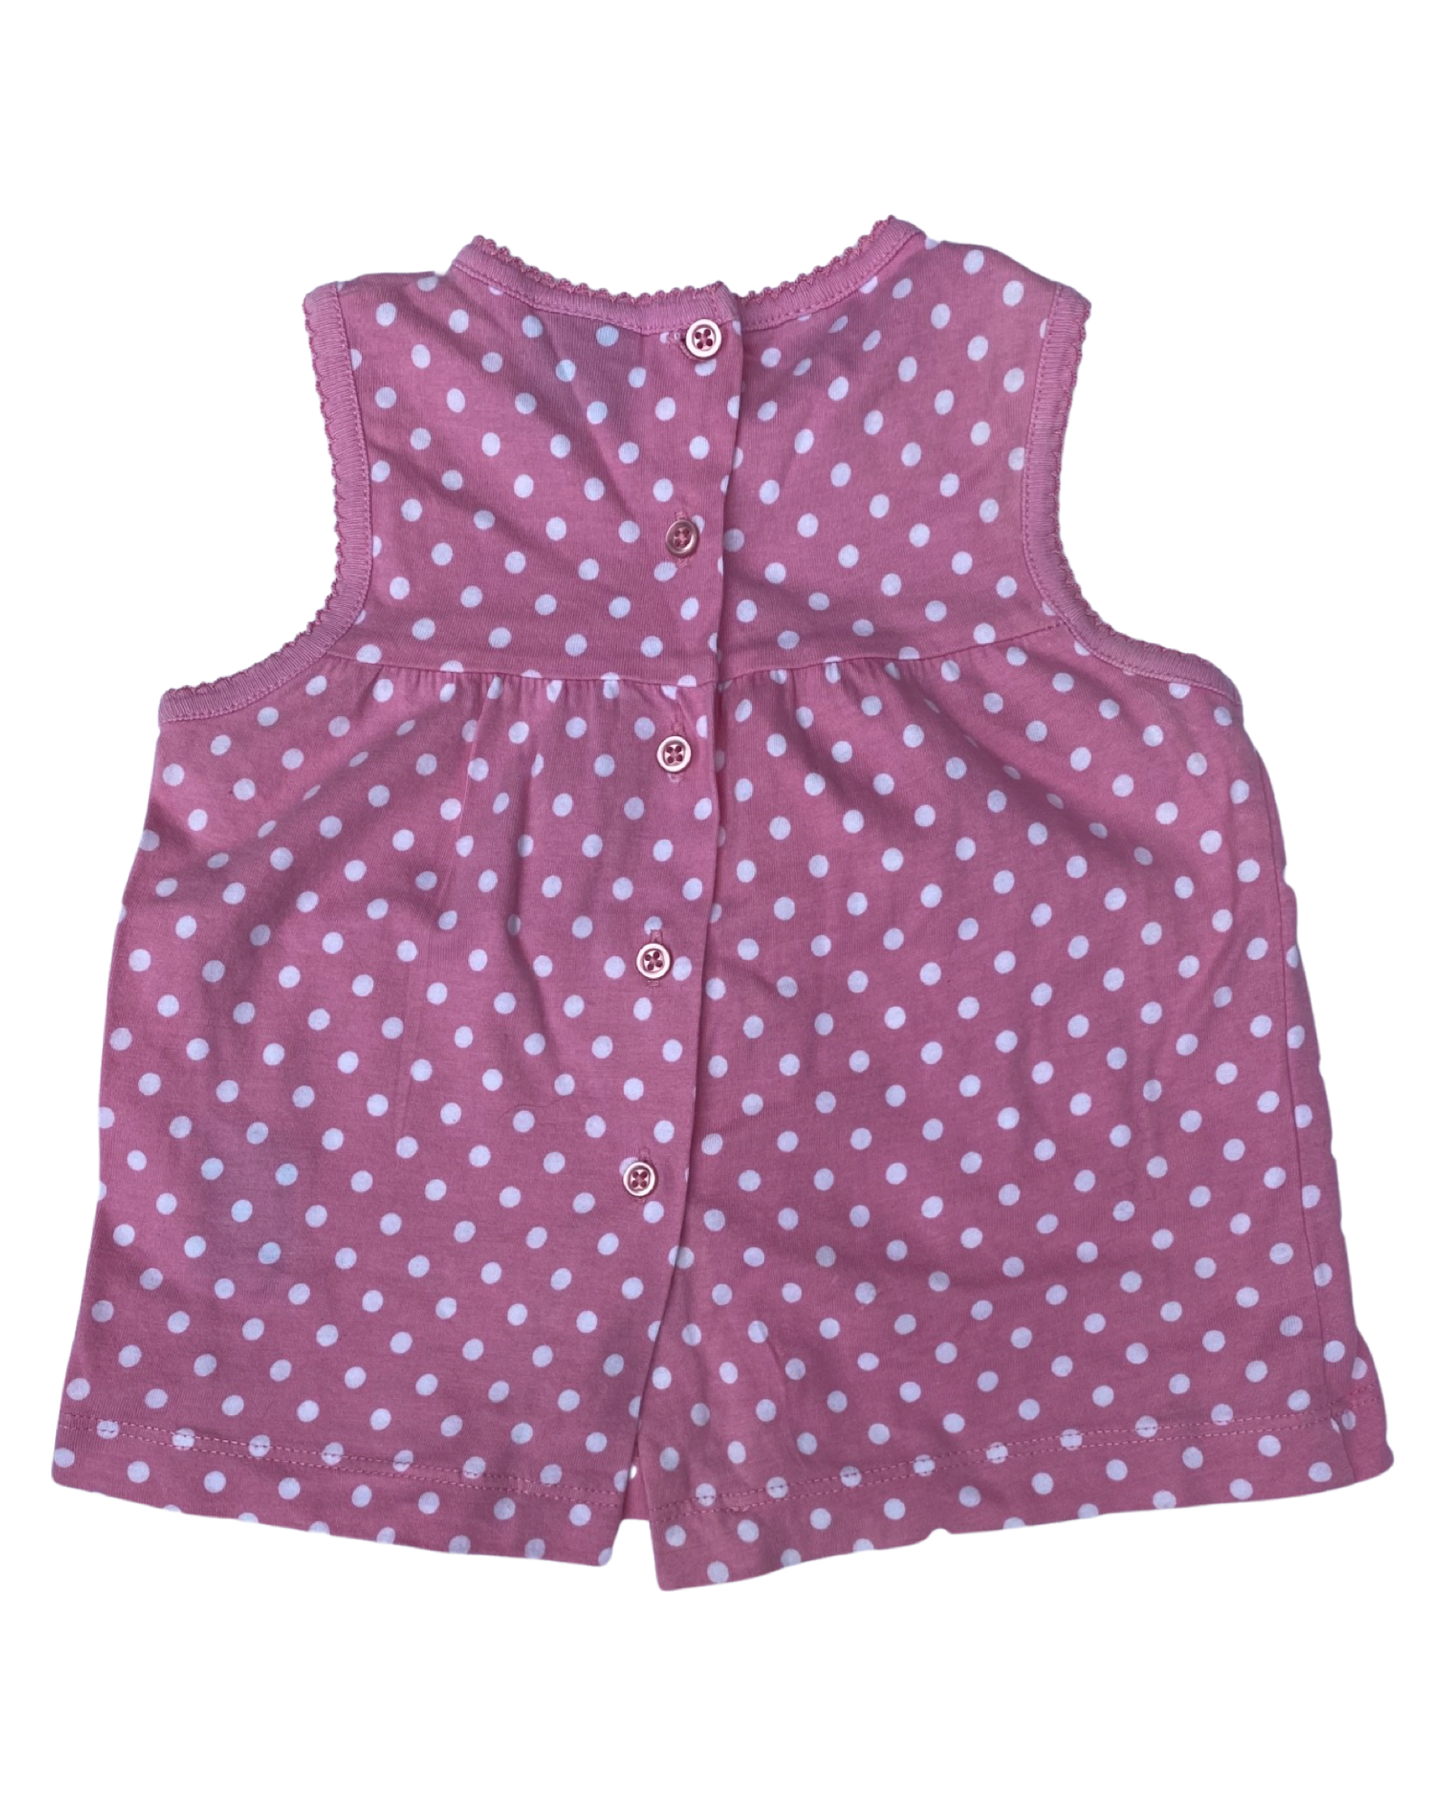 Baby Boden pink dotty sleeveless top (size 12-18mths)